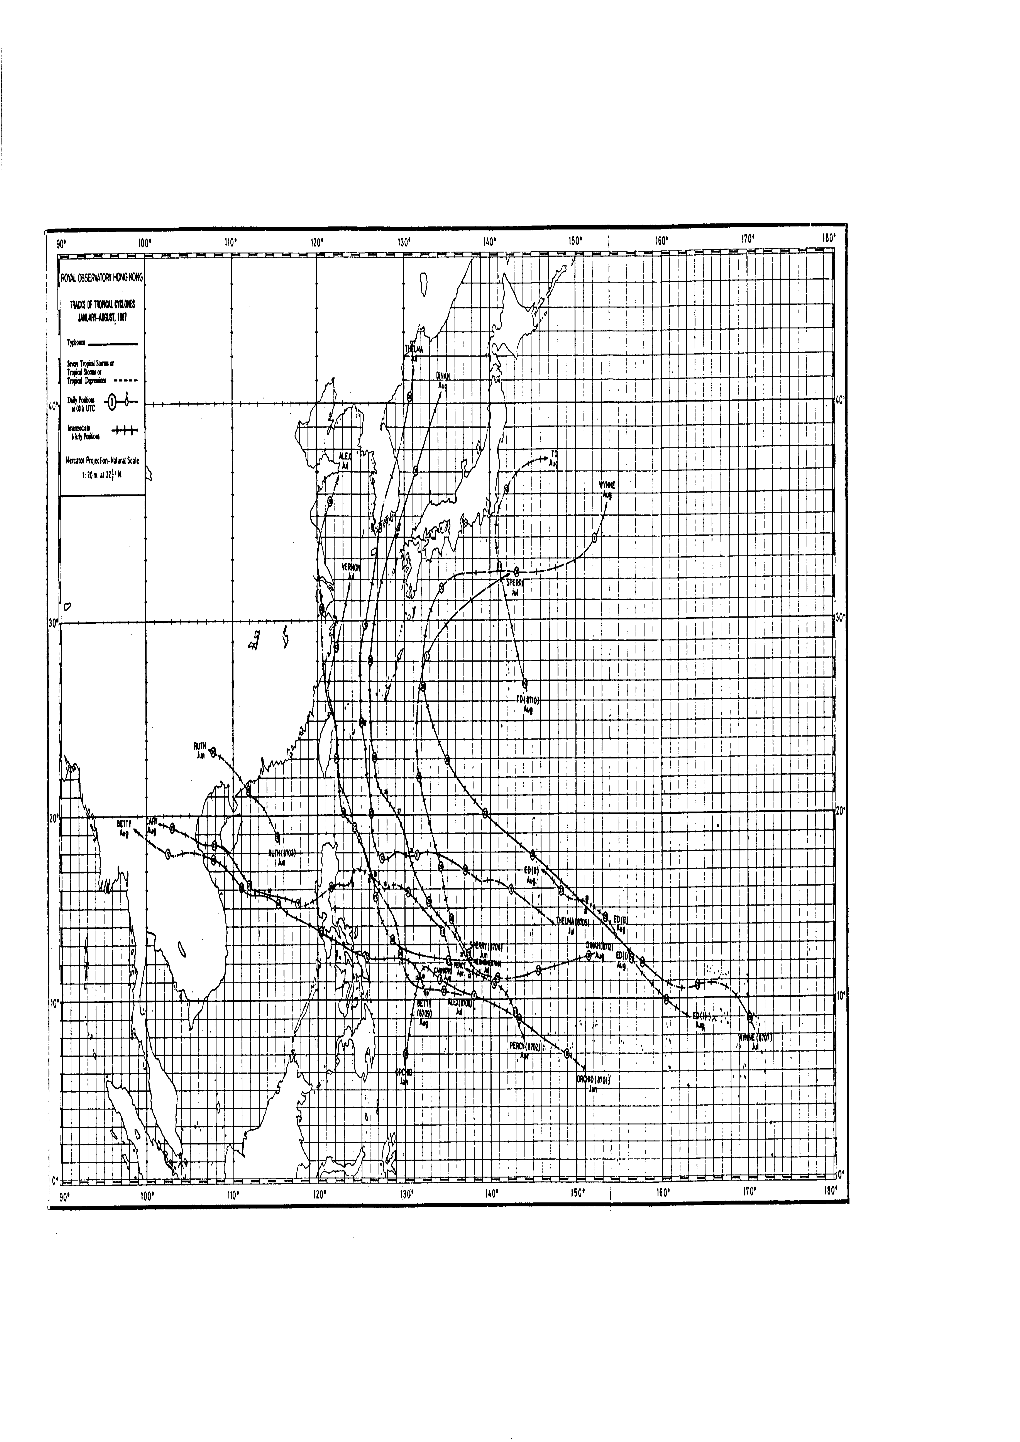 Tropical Cyclones in 1987